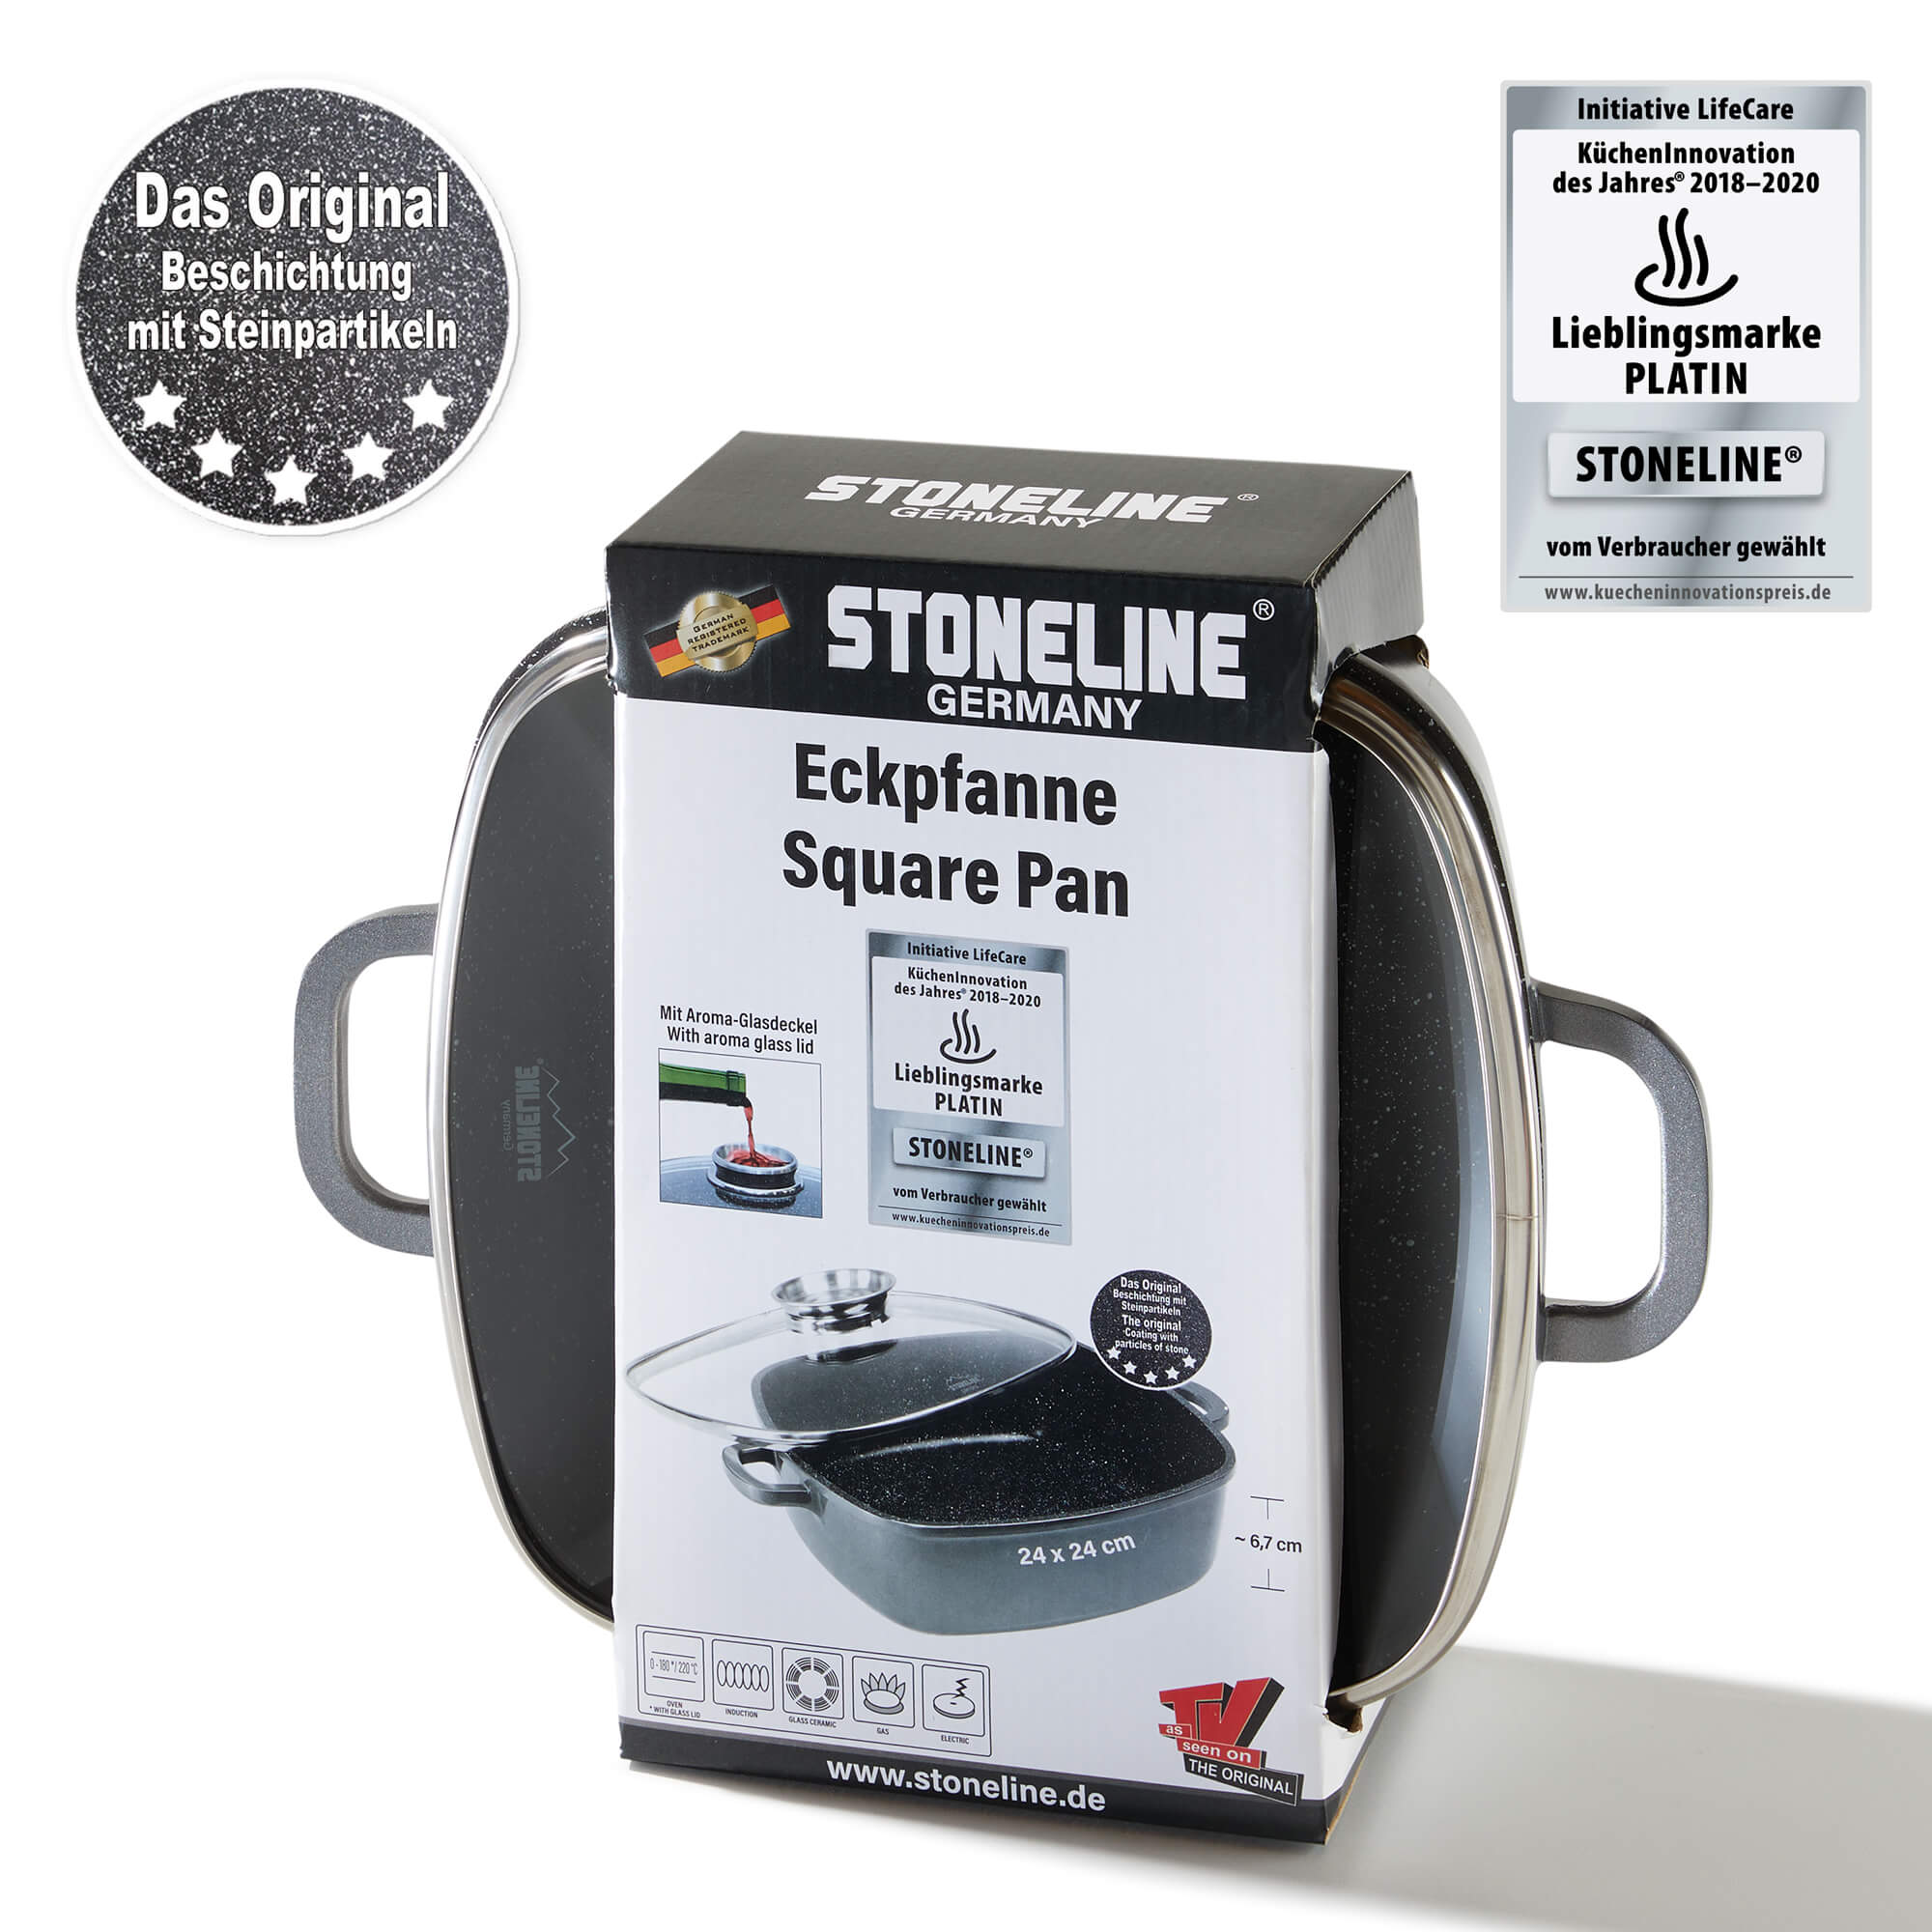 STONELINE XXL Fish and Schnitzel Pan 35 x 24 cm with Glass Lids Suitable for Induction Cookers